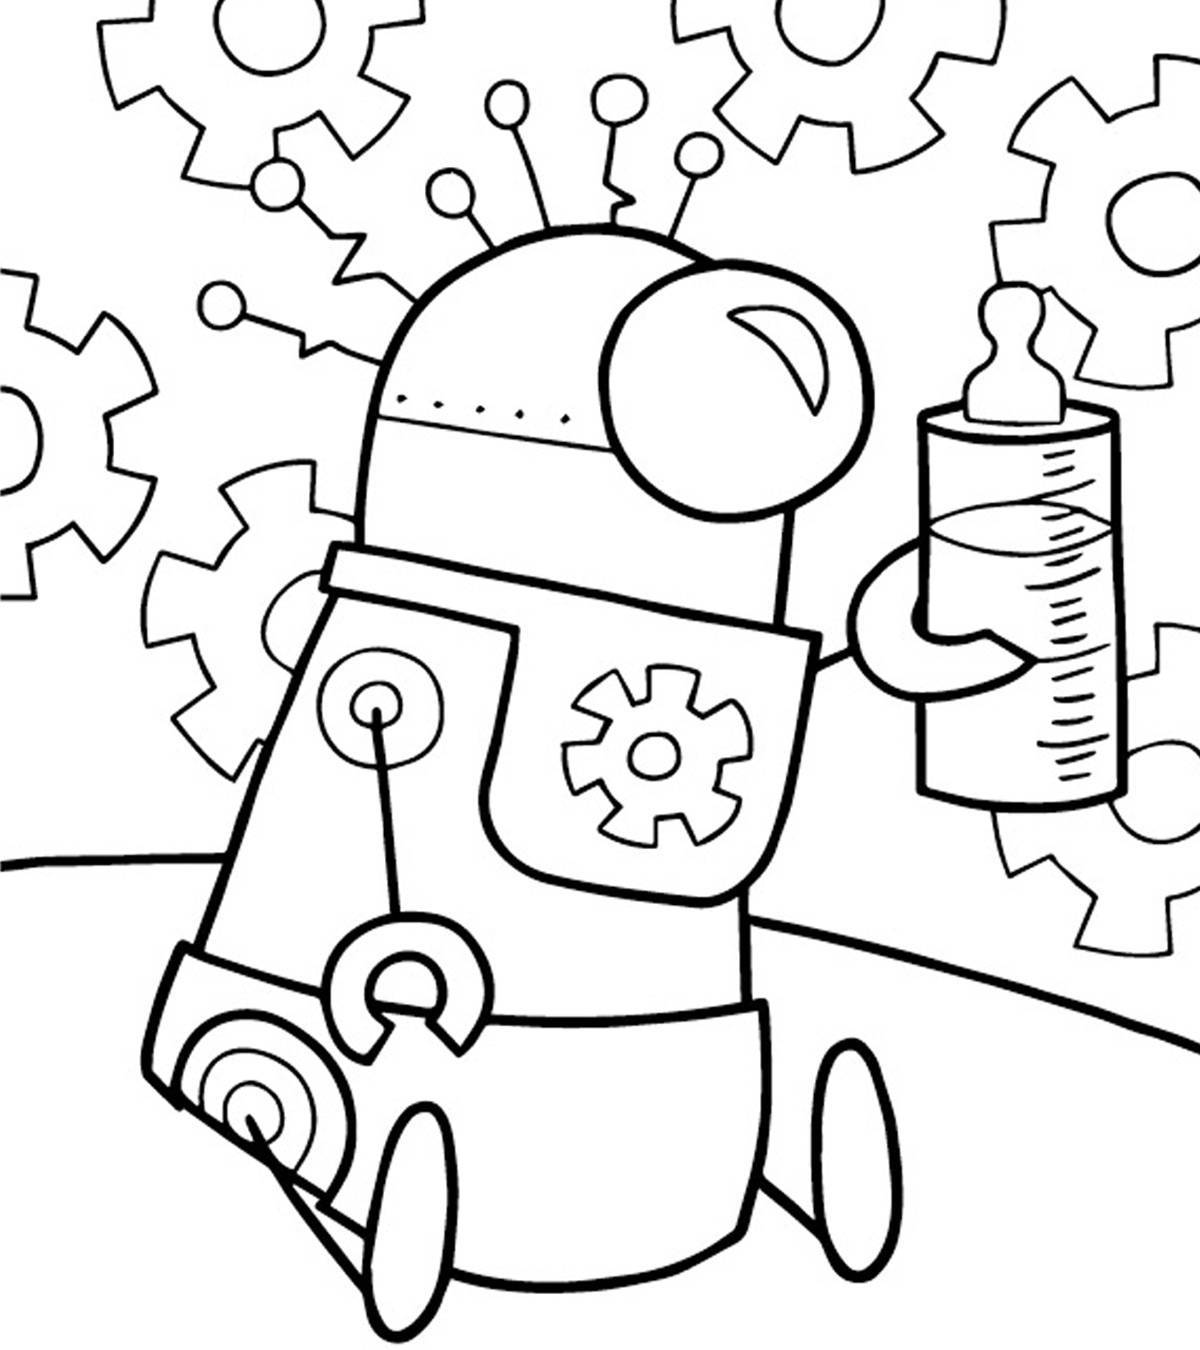 Fun robot coloring book for kids 5-6 years old